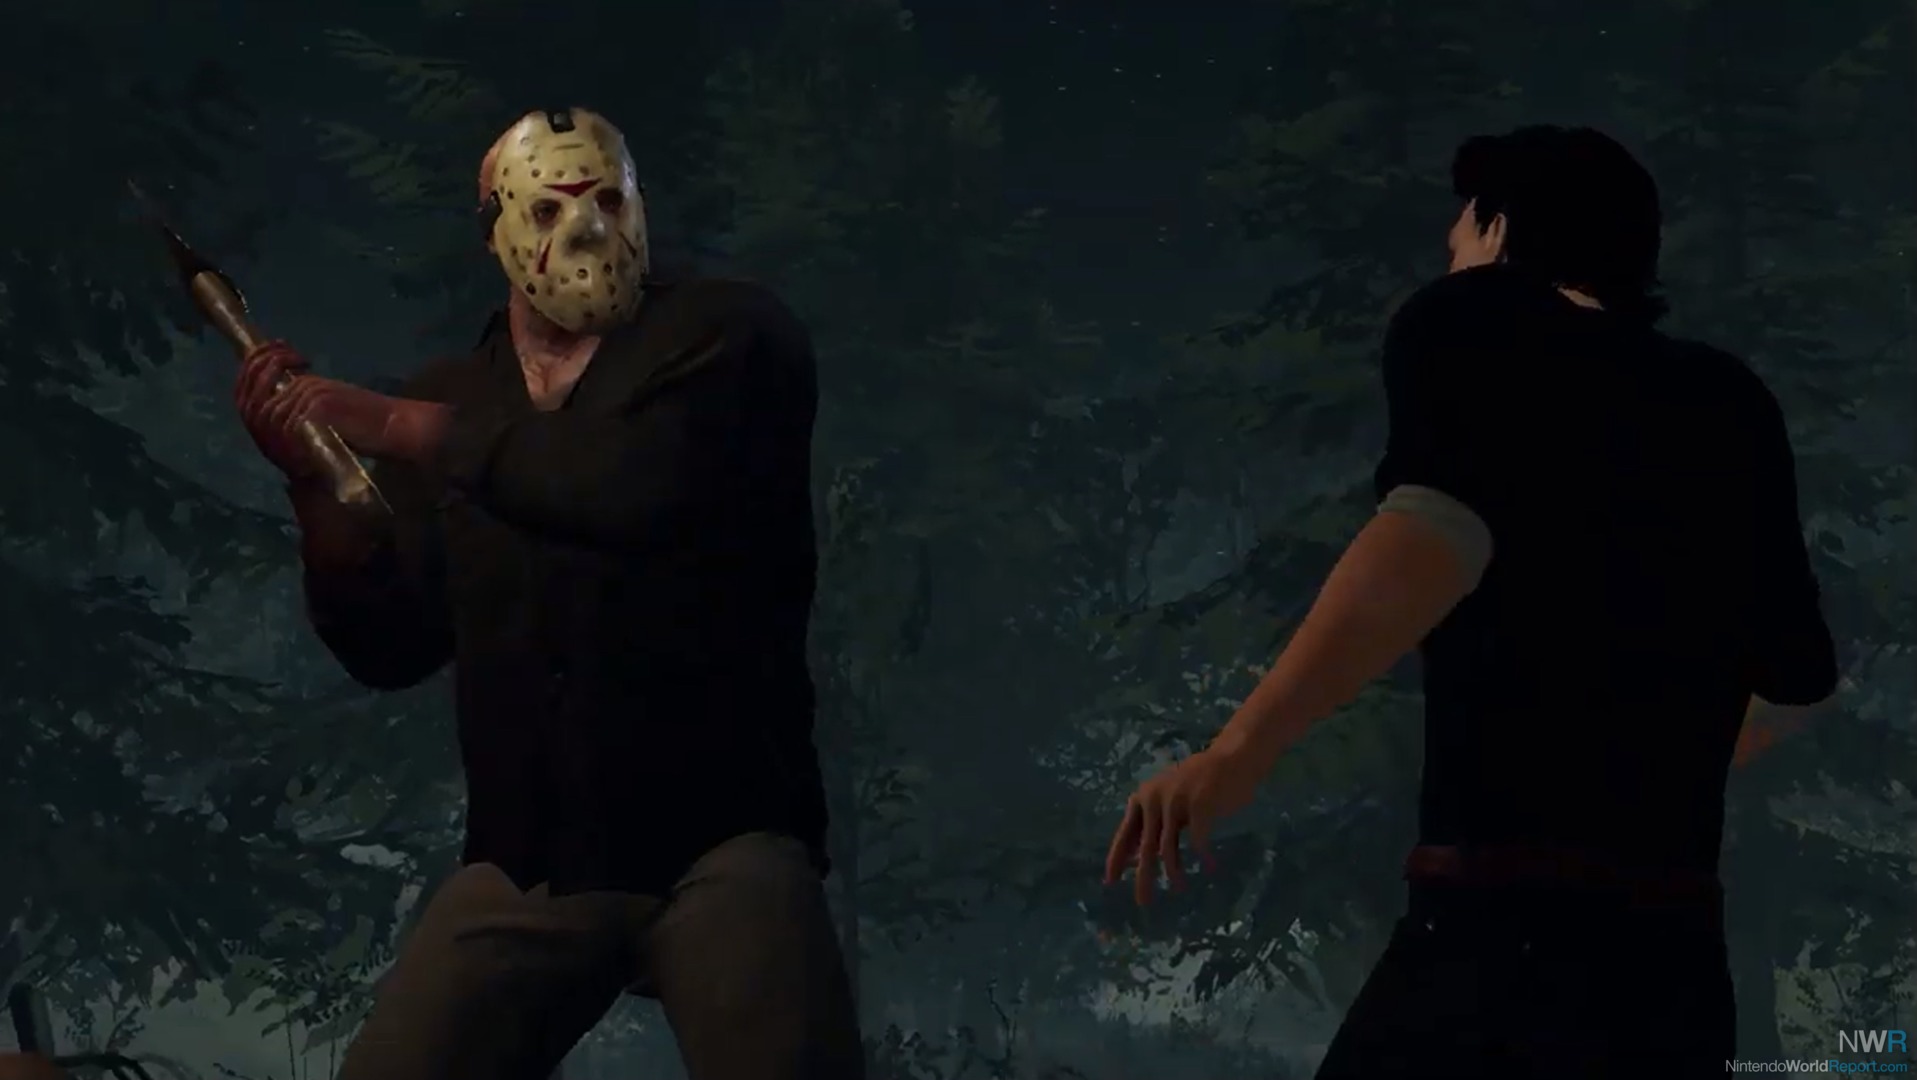 Friday The 13th: The Game Review